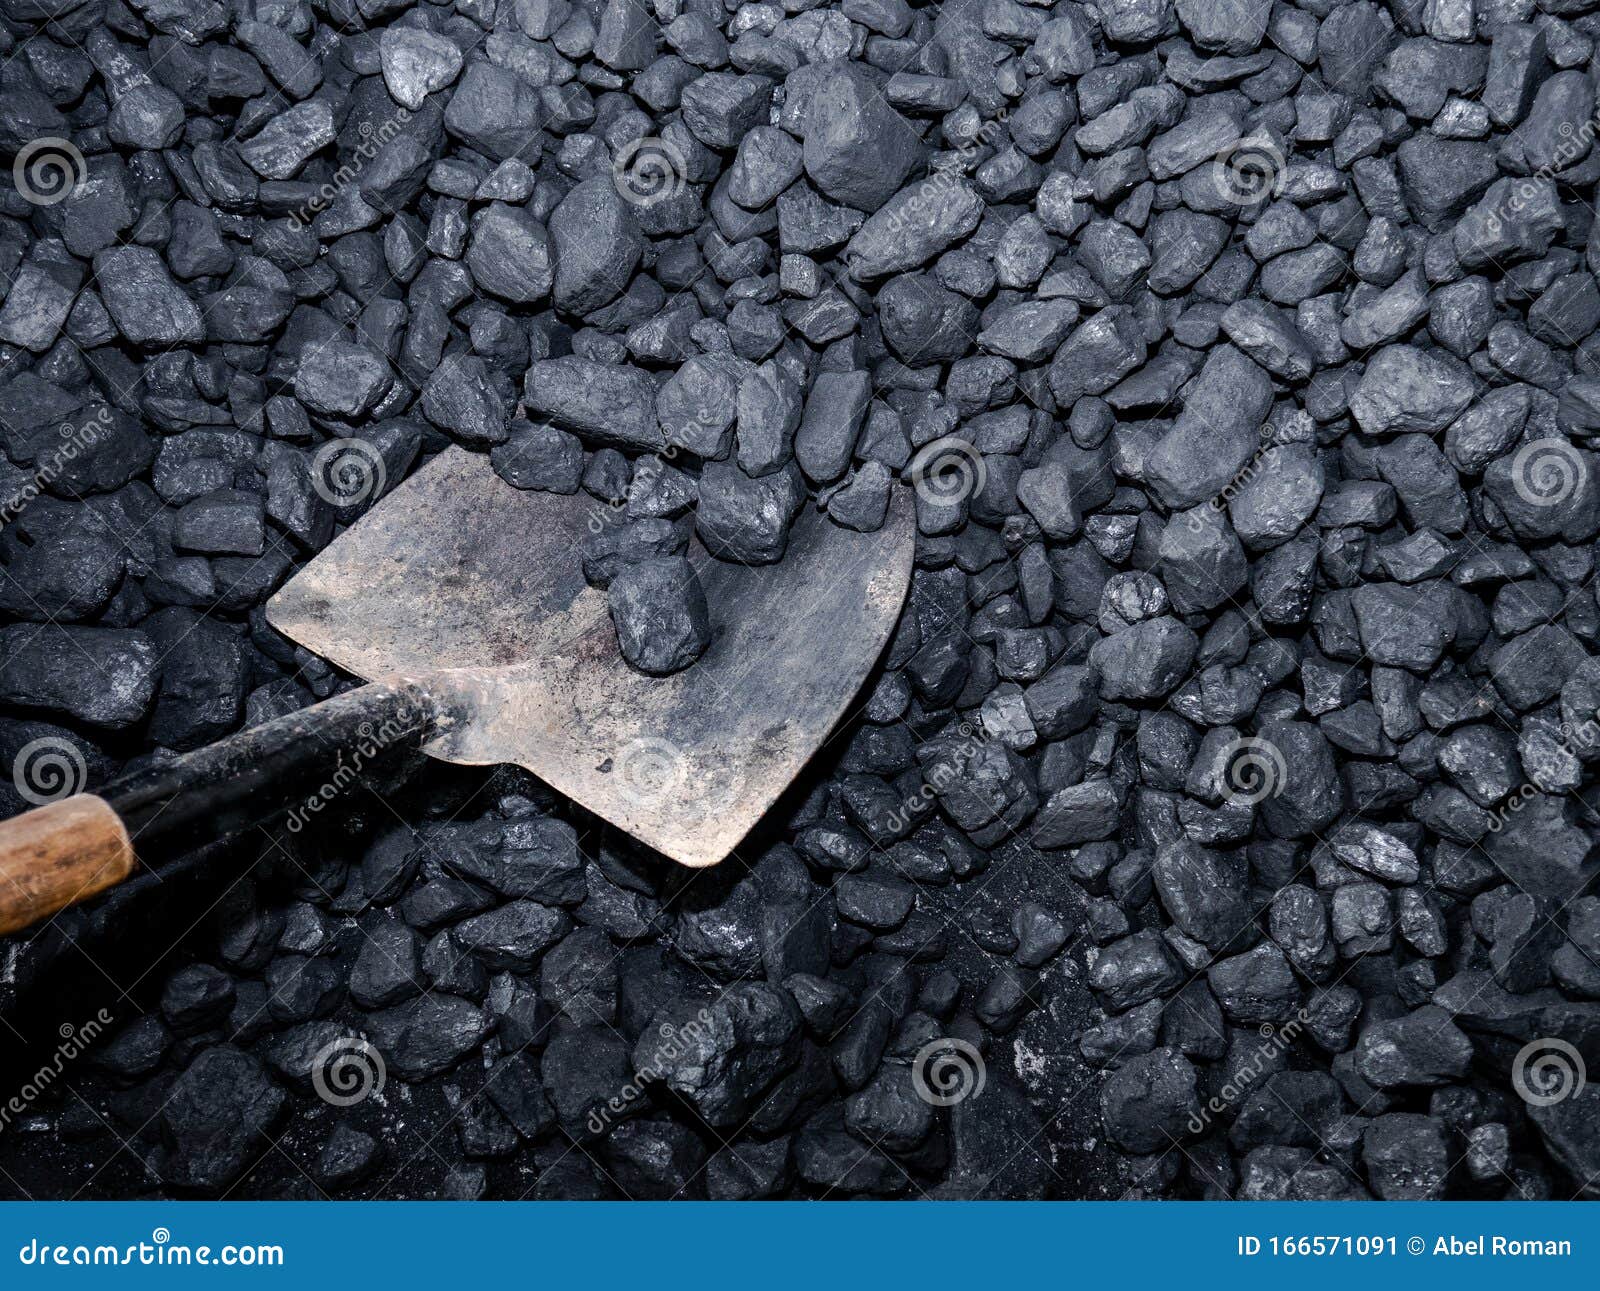 picking up carbon with a shovel